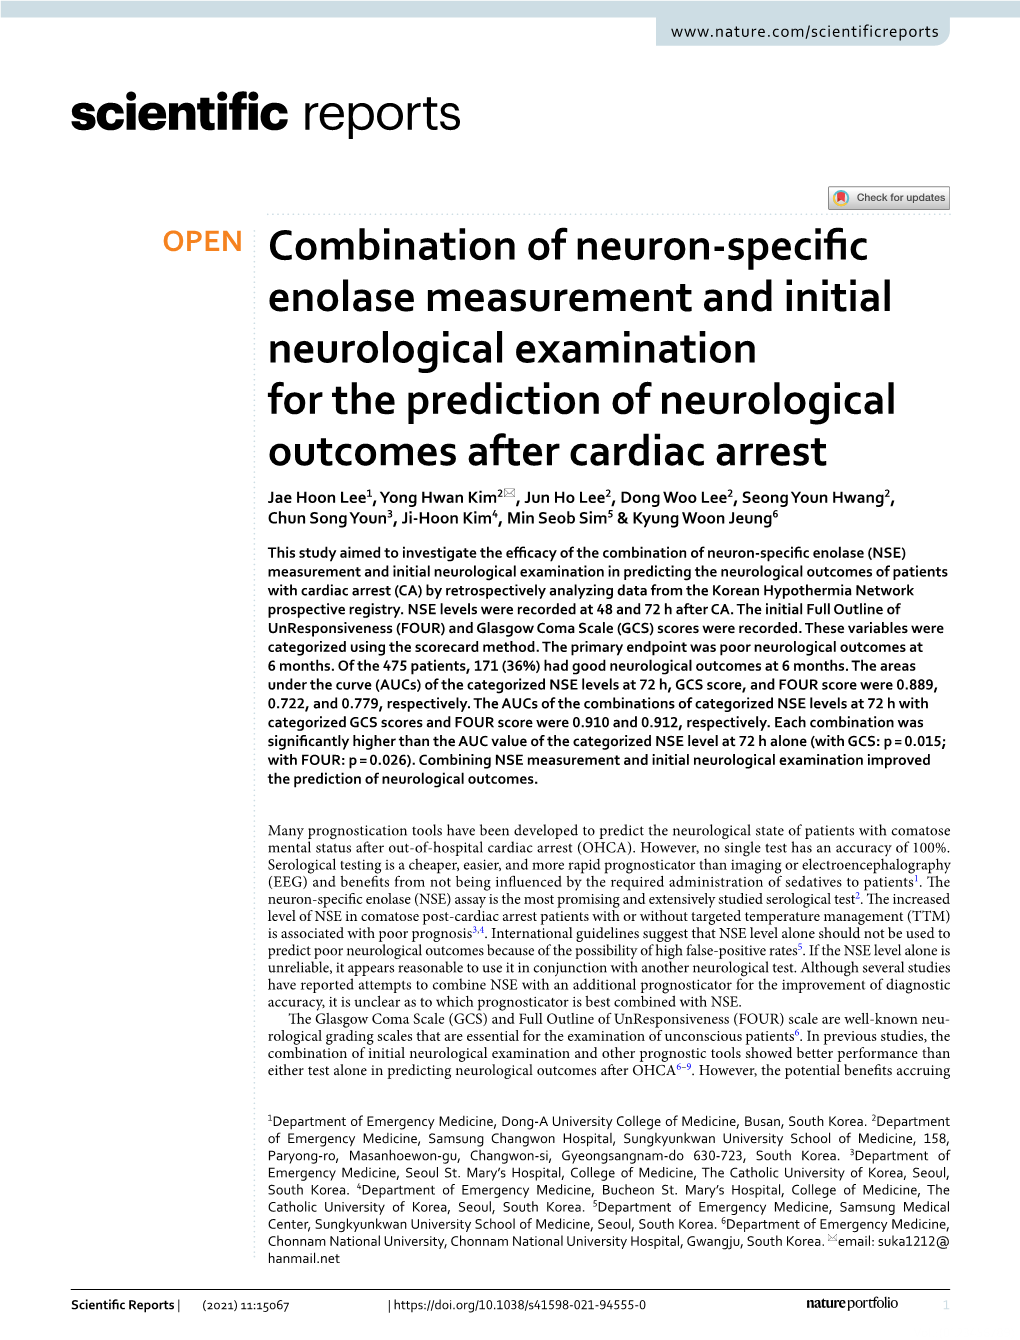 Combination of Neuron-Specific Enolase Measurement and Initial